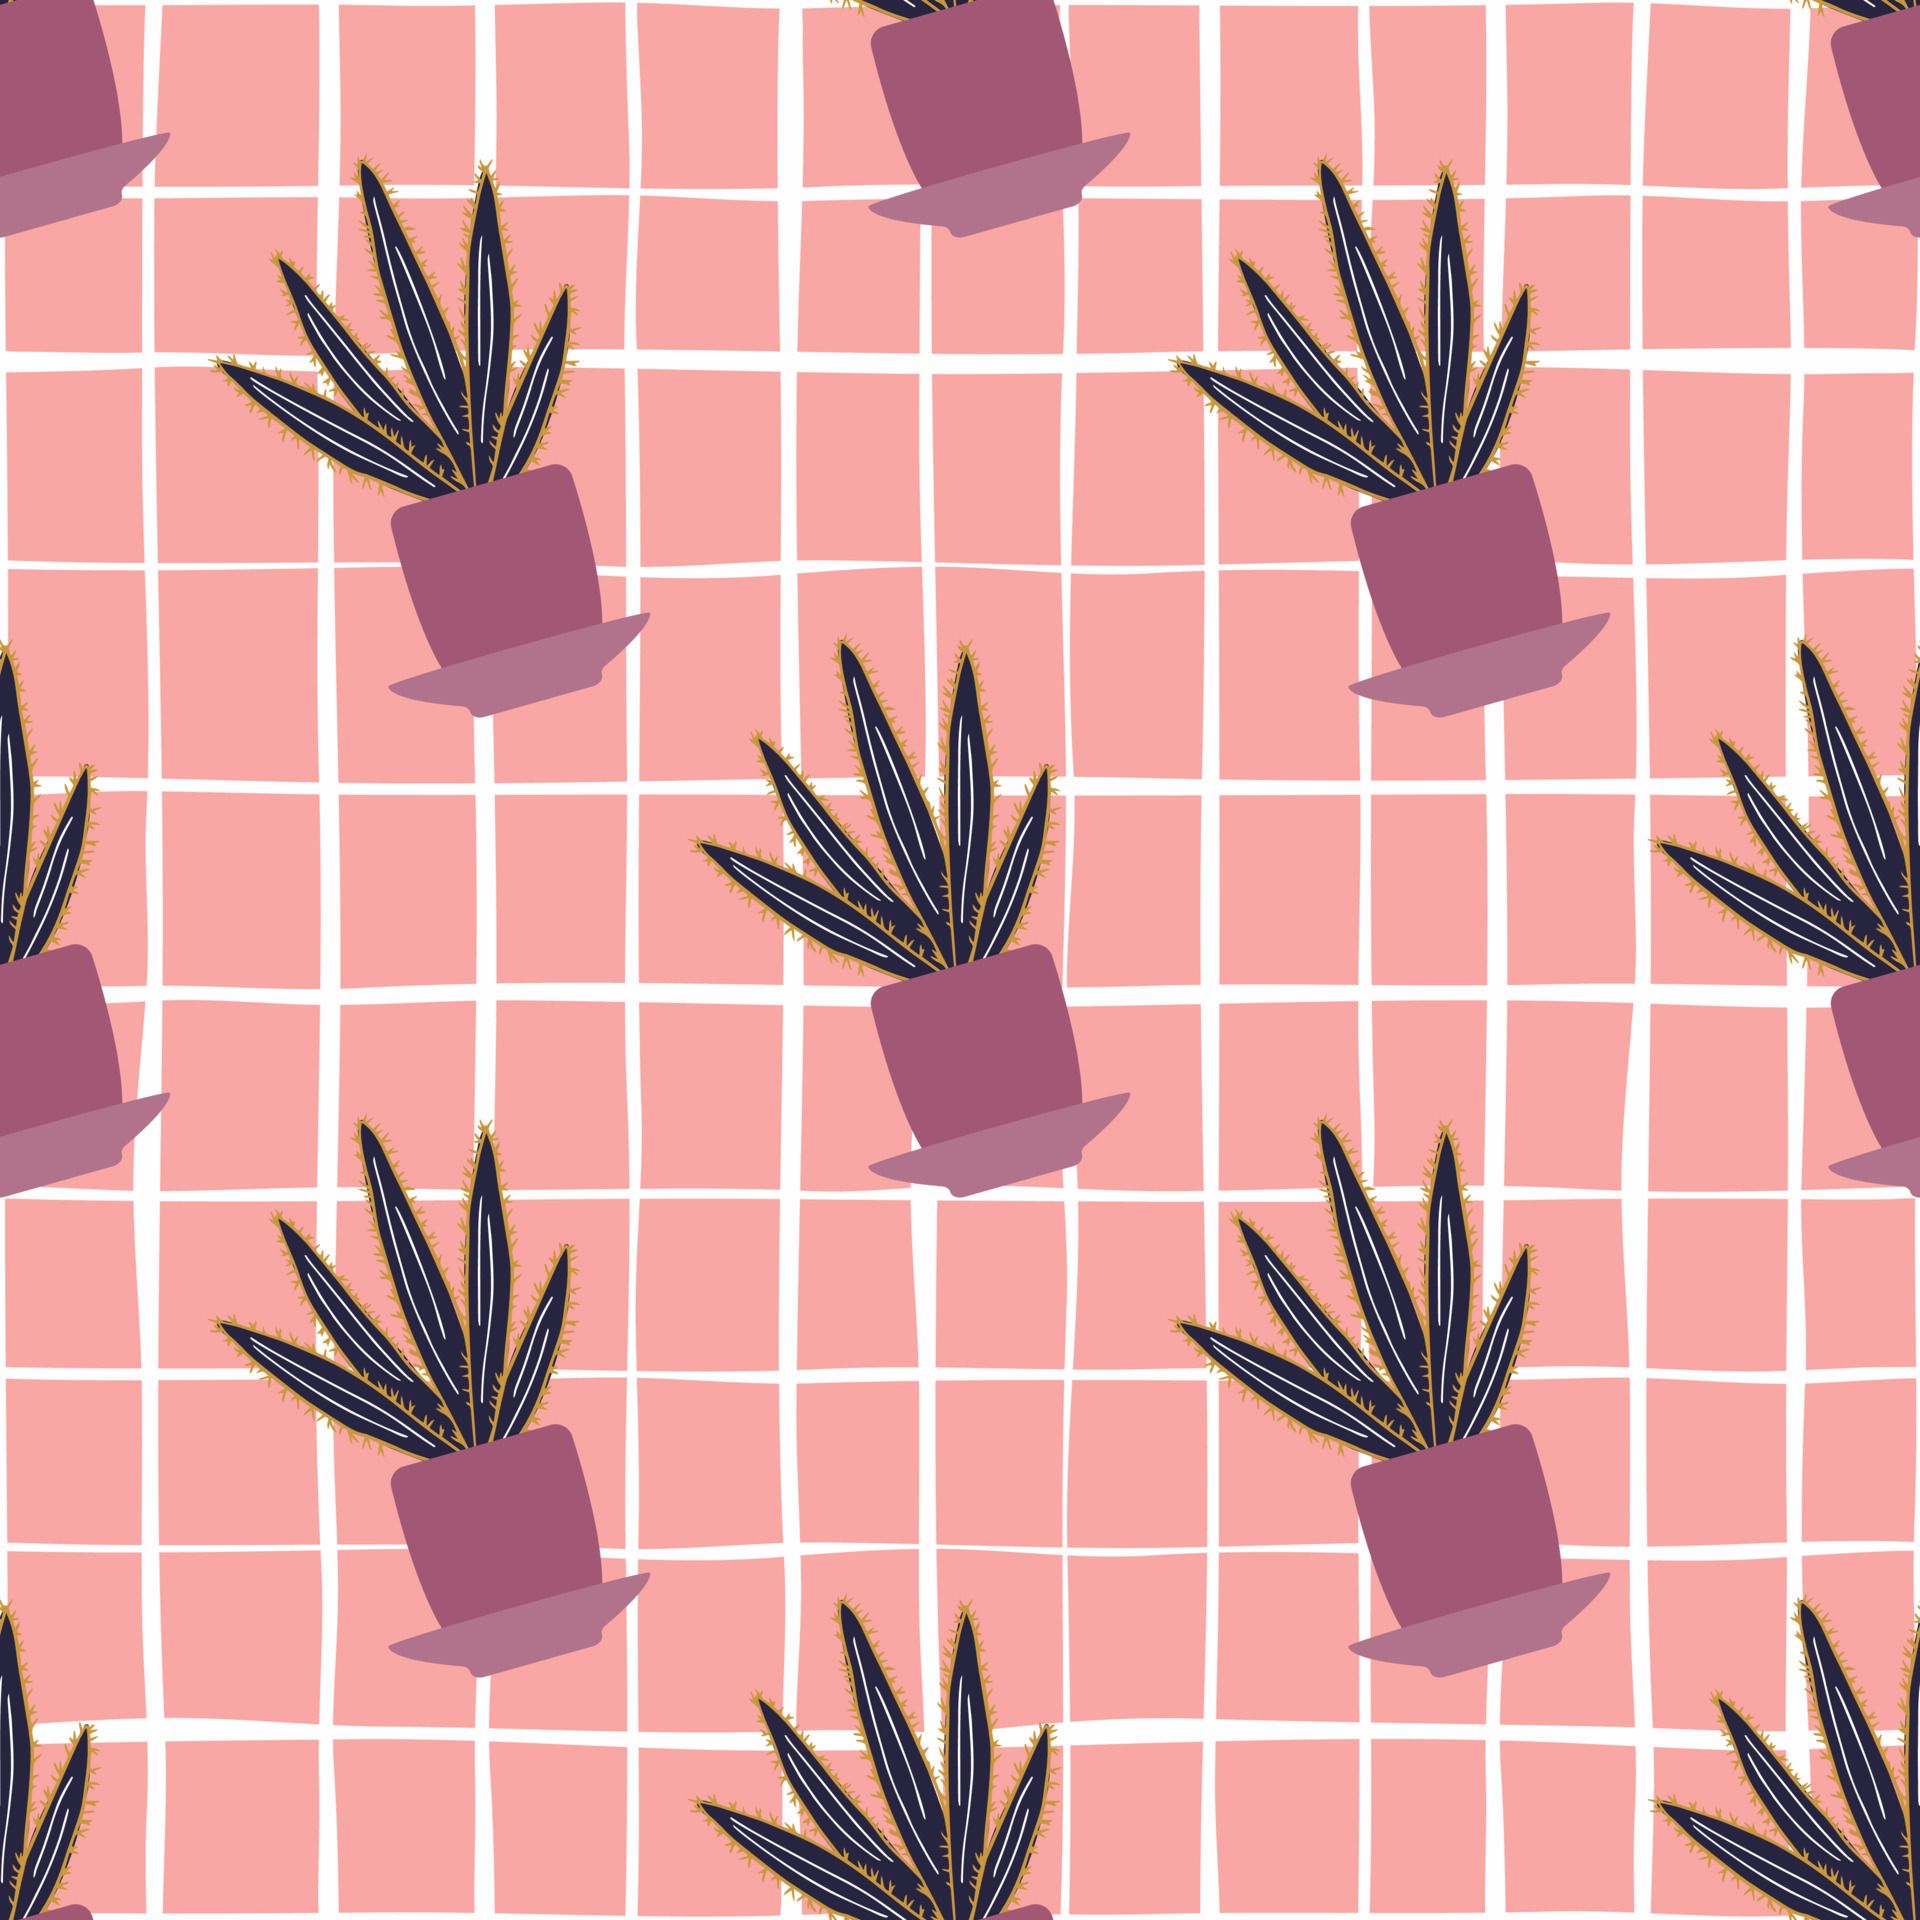 A pattern of plants on a pink background - Cactus